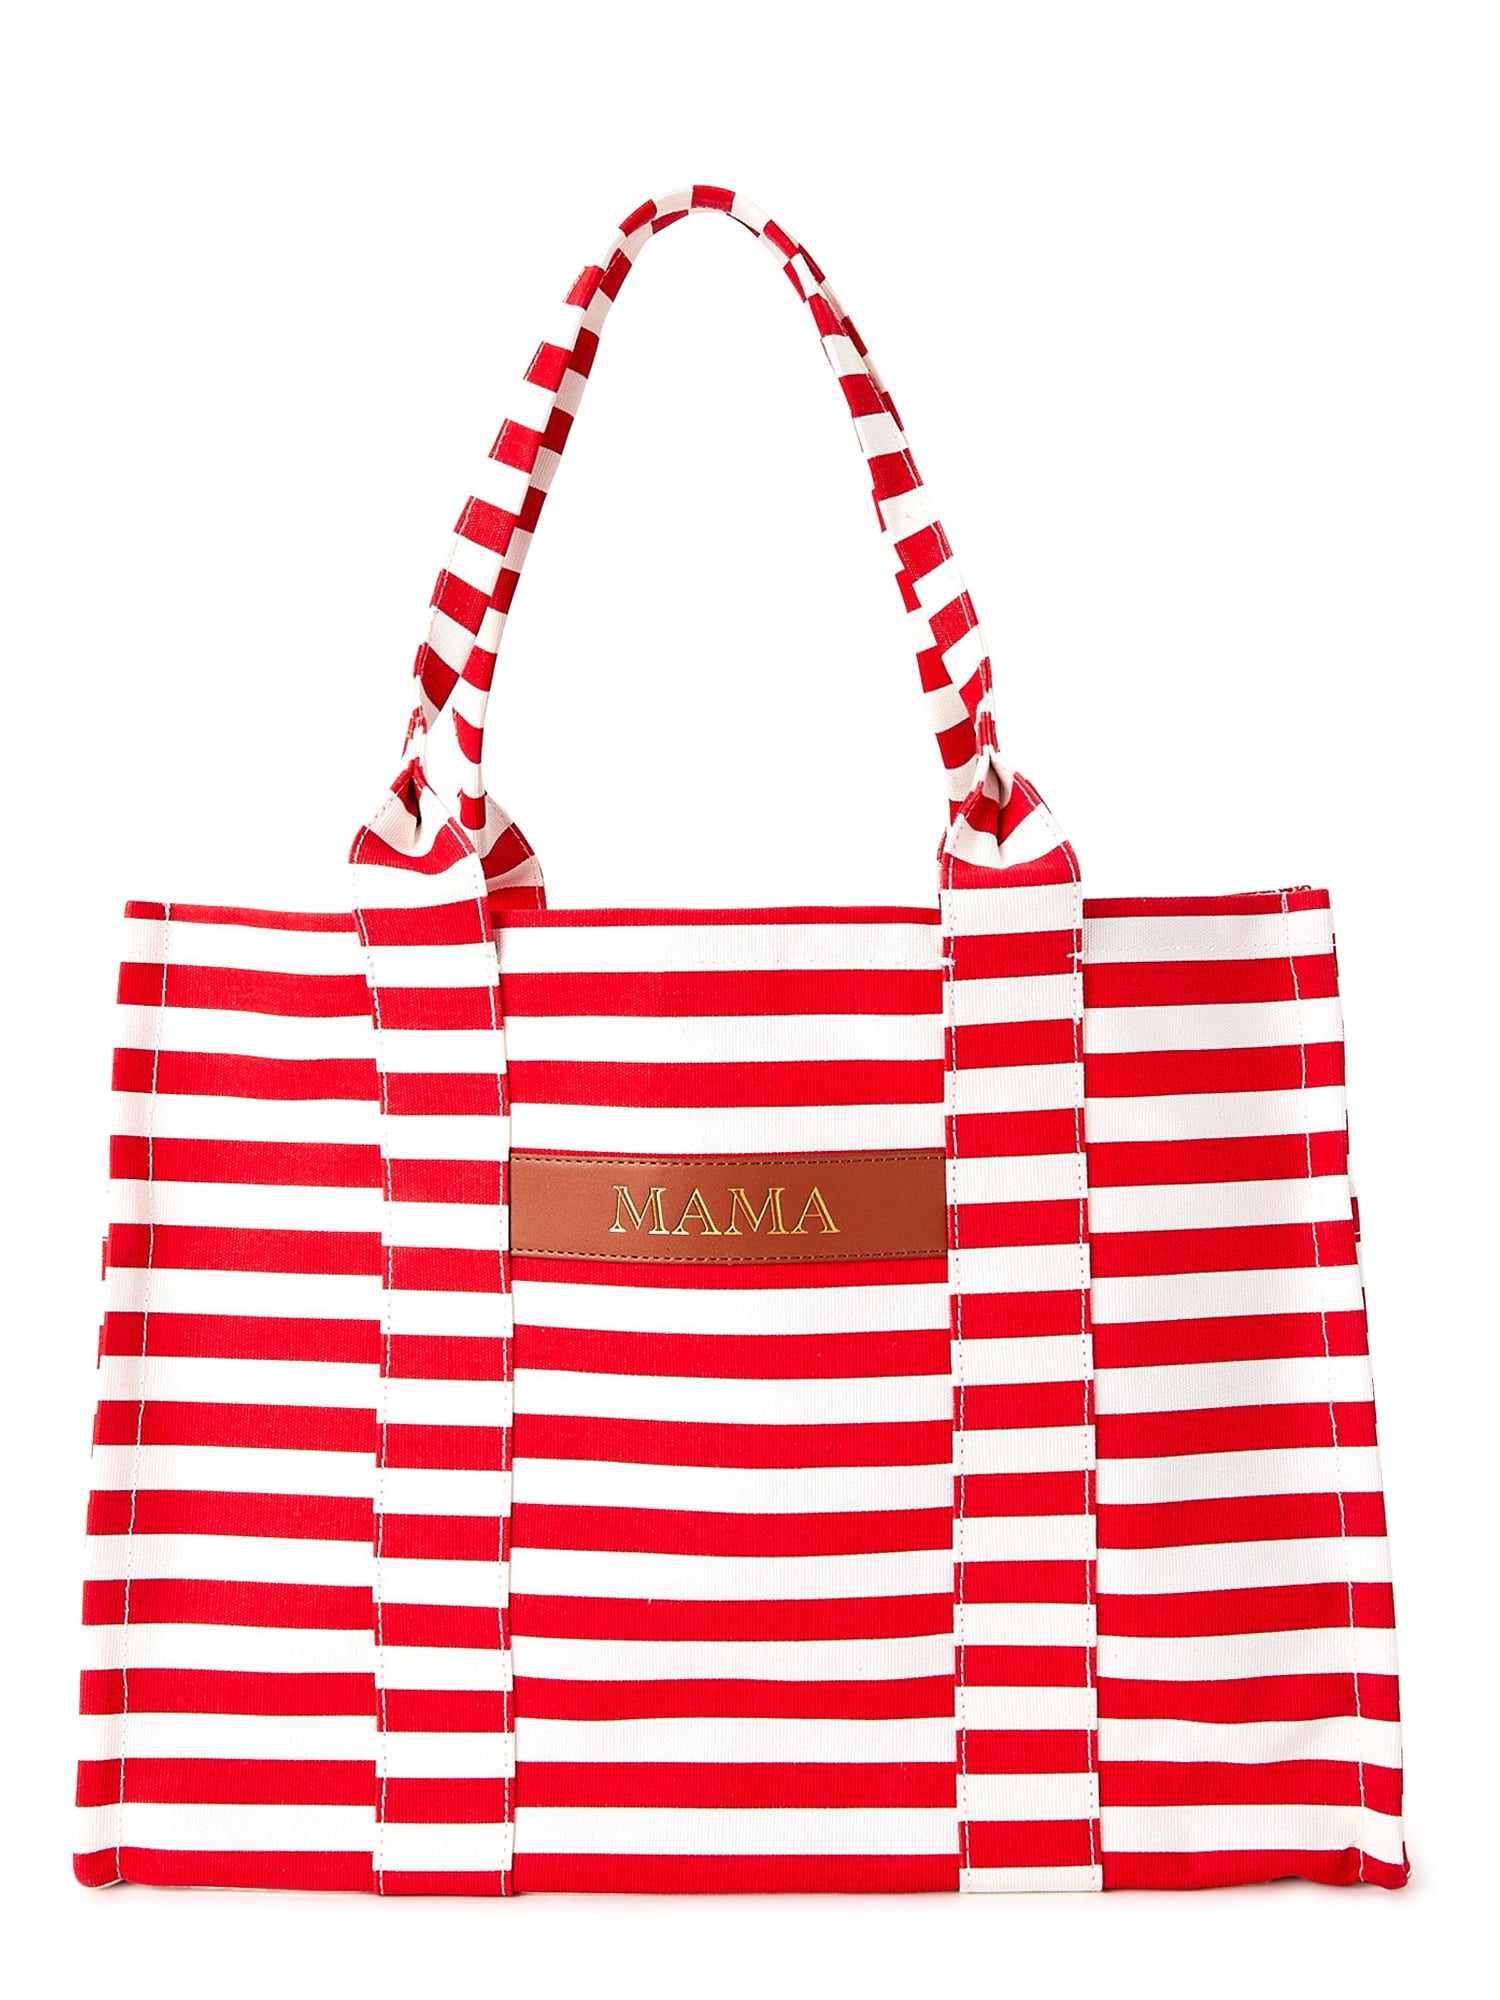 A Canvas Tote Bag to Elevate Any Outfit - The Vanilla Plum